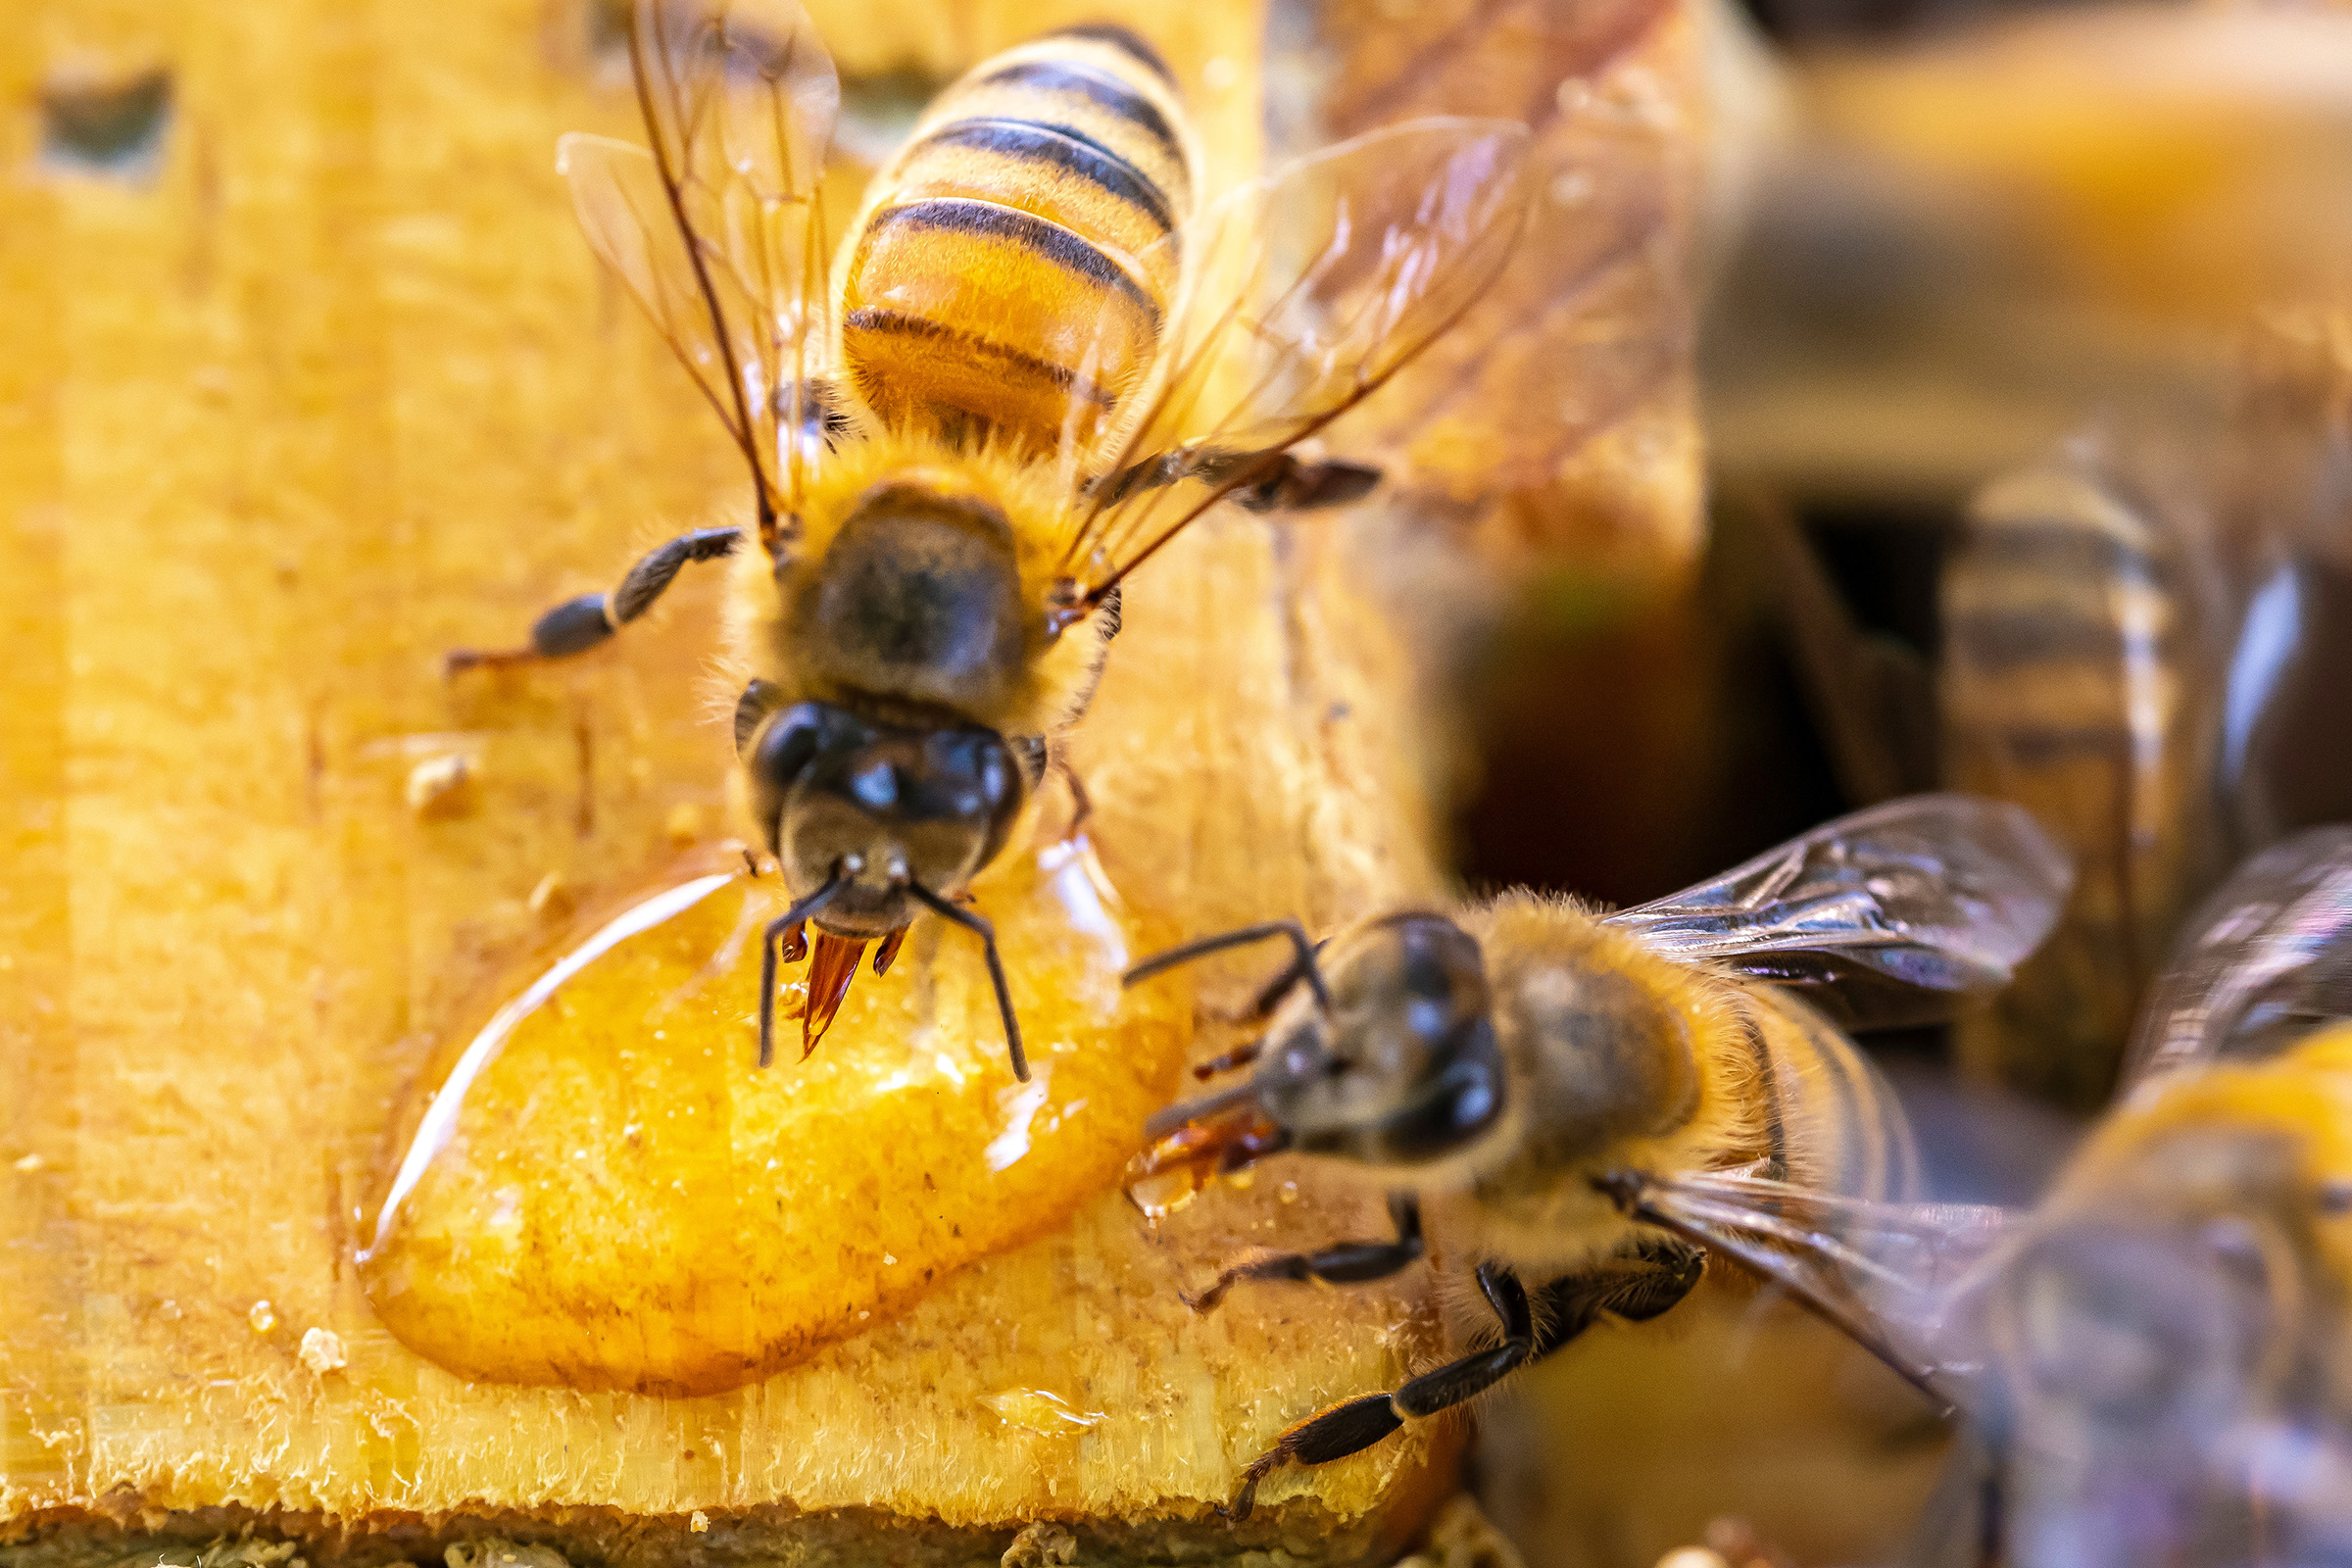 The workshop’s featured guest speaker, Jon Zawislak, will discuss the basics of raising bees and producing honey. (Photo by Todd Johnson, OSU Agriculture.)